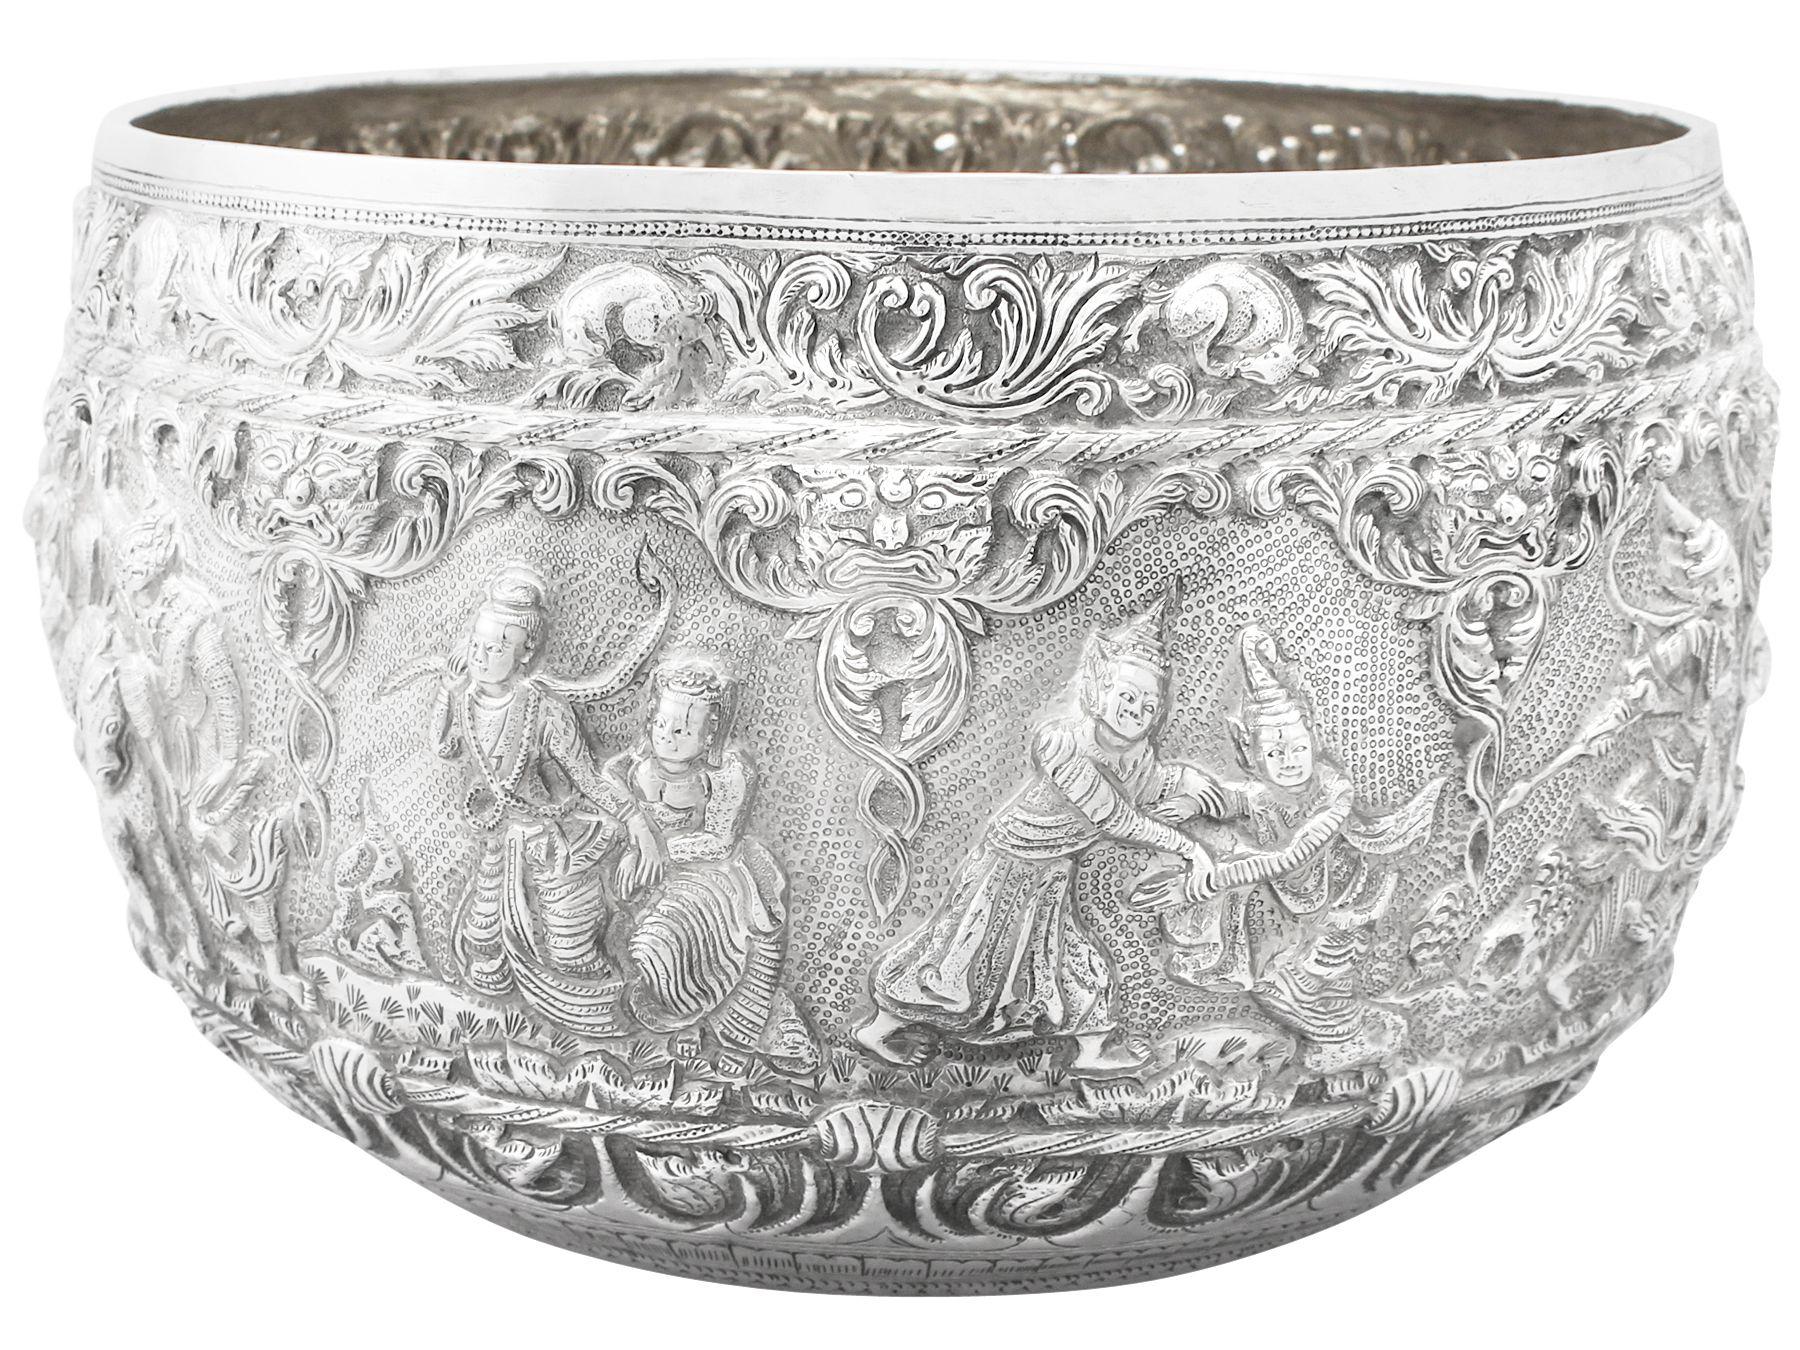 An exceptional fine and impressive, large antique Burmese silver thabeik bowl; an addition to our ornamental silverware collection.

This exceptional antique Burmese thabeik silver bowl has a circular rounded form.

The surface of the bowl is